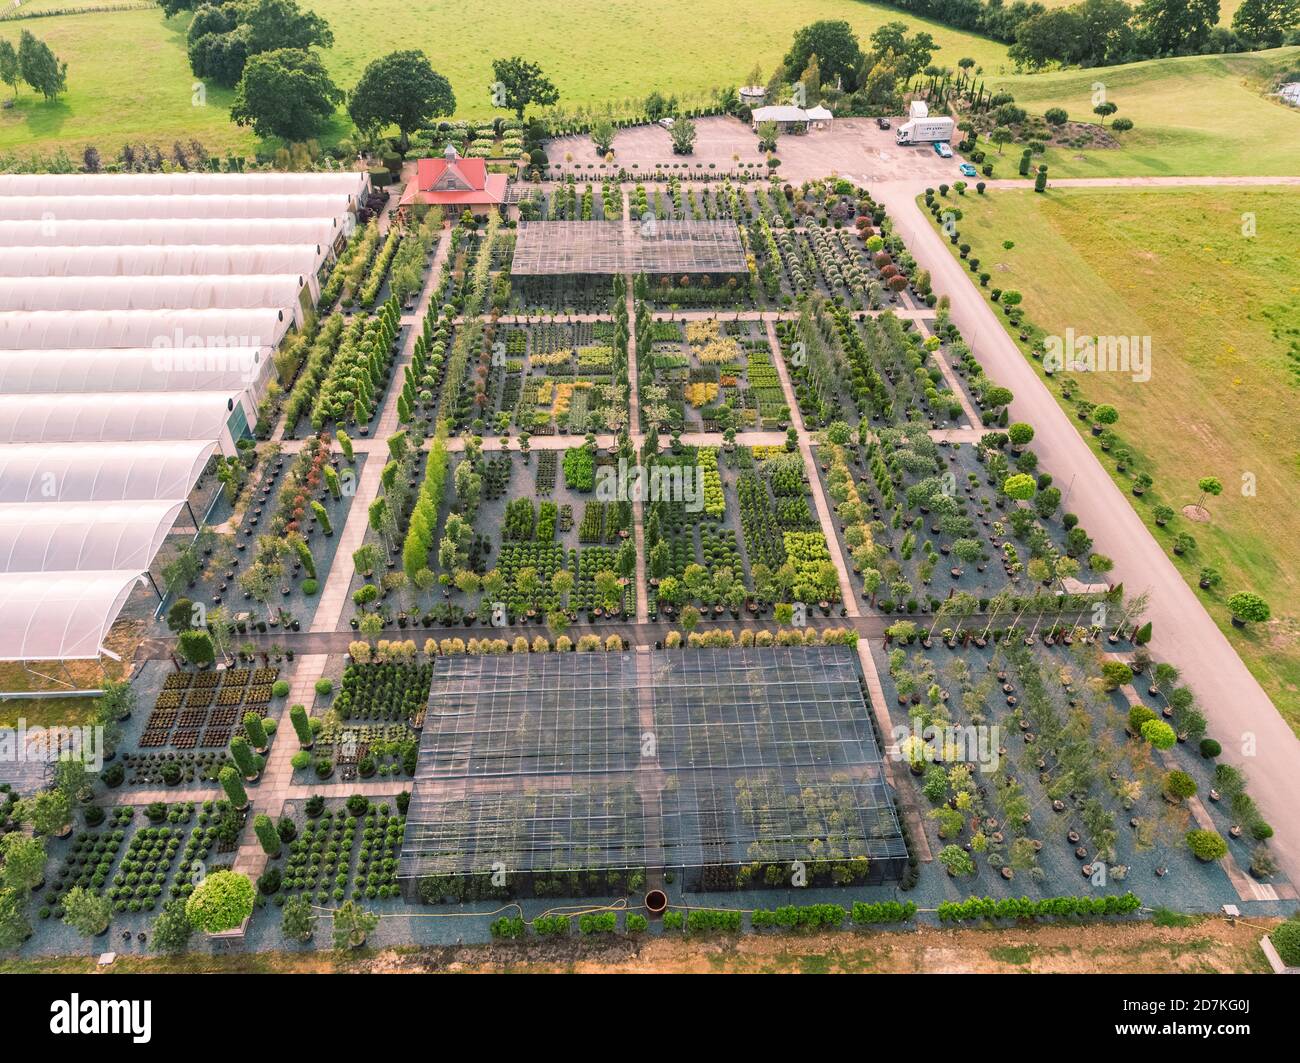 Architectural Plants is a nursery in Pulborough, West Sussex, England, UK. set within 32 acres of open fields and surrounded by farmland overlooking t Stock Photo